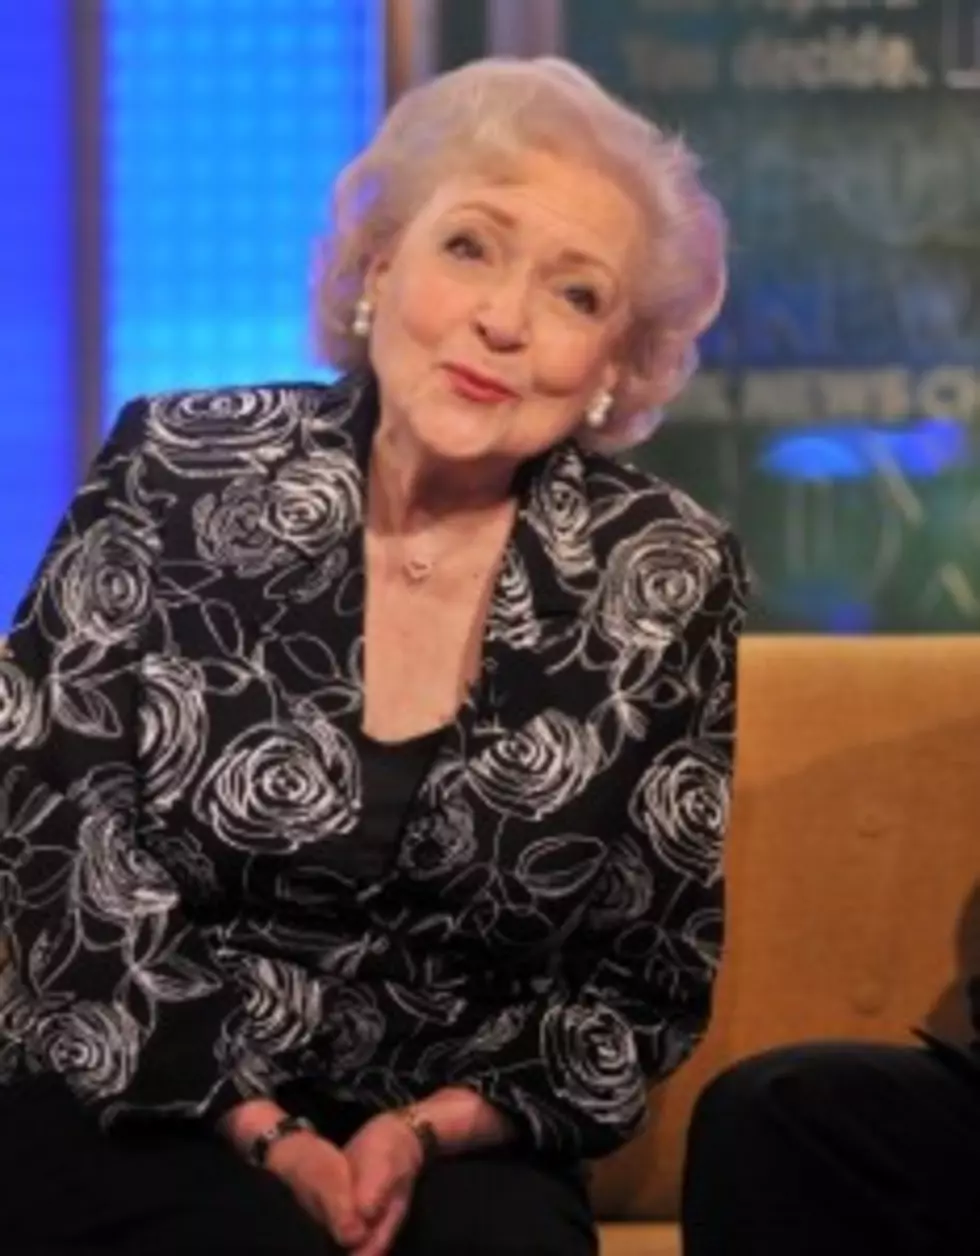 Betty White Is Invited To Upcoming Marine Ball [VIDEO]